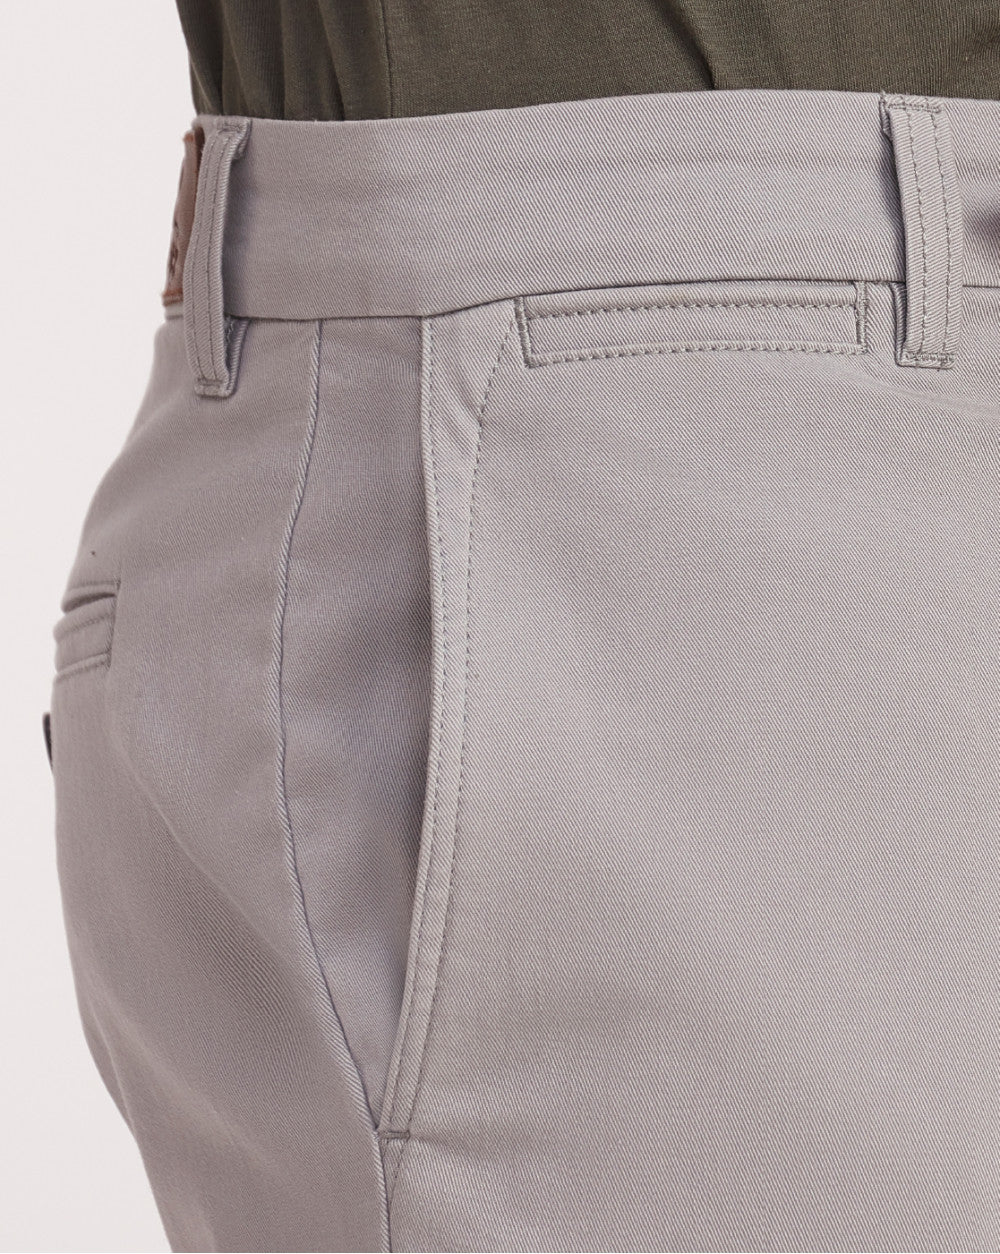 Tapered Fit Urban Chinos - Grey